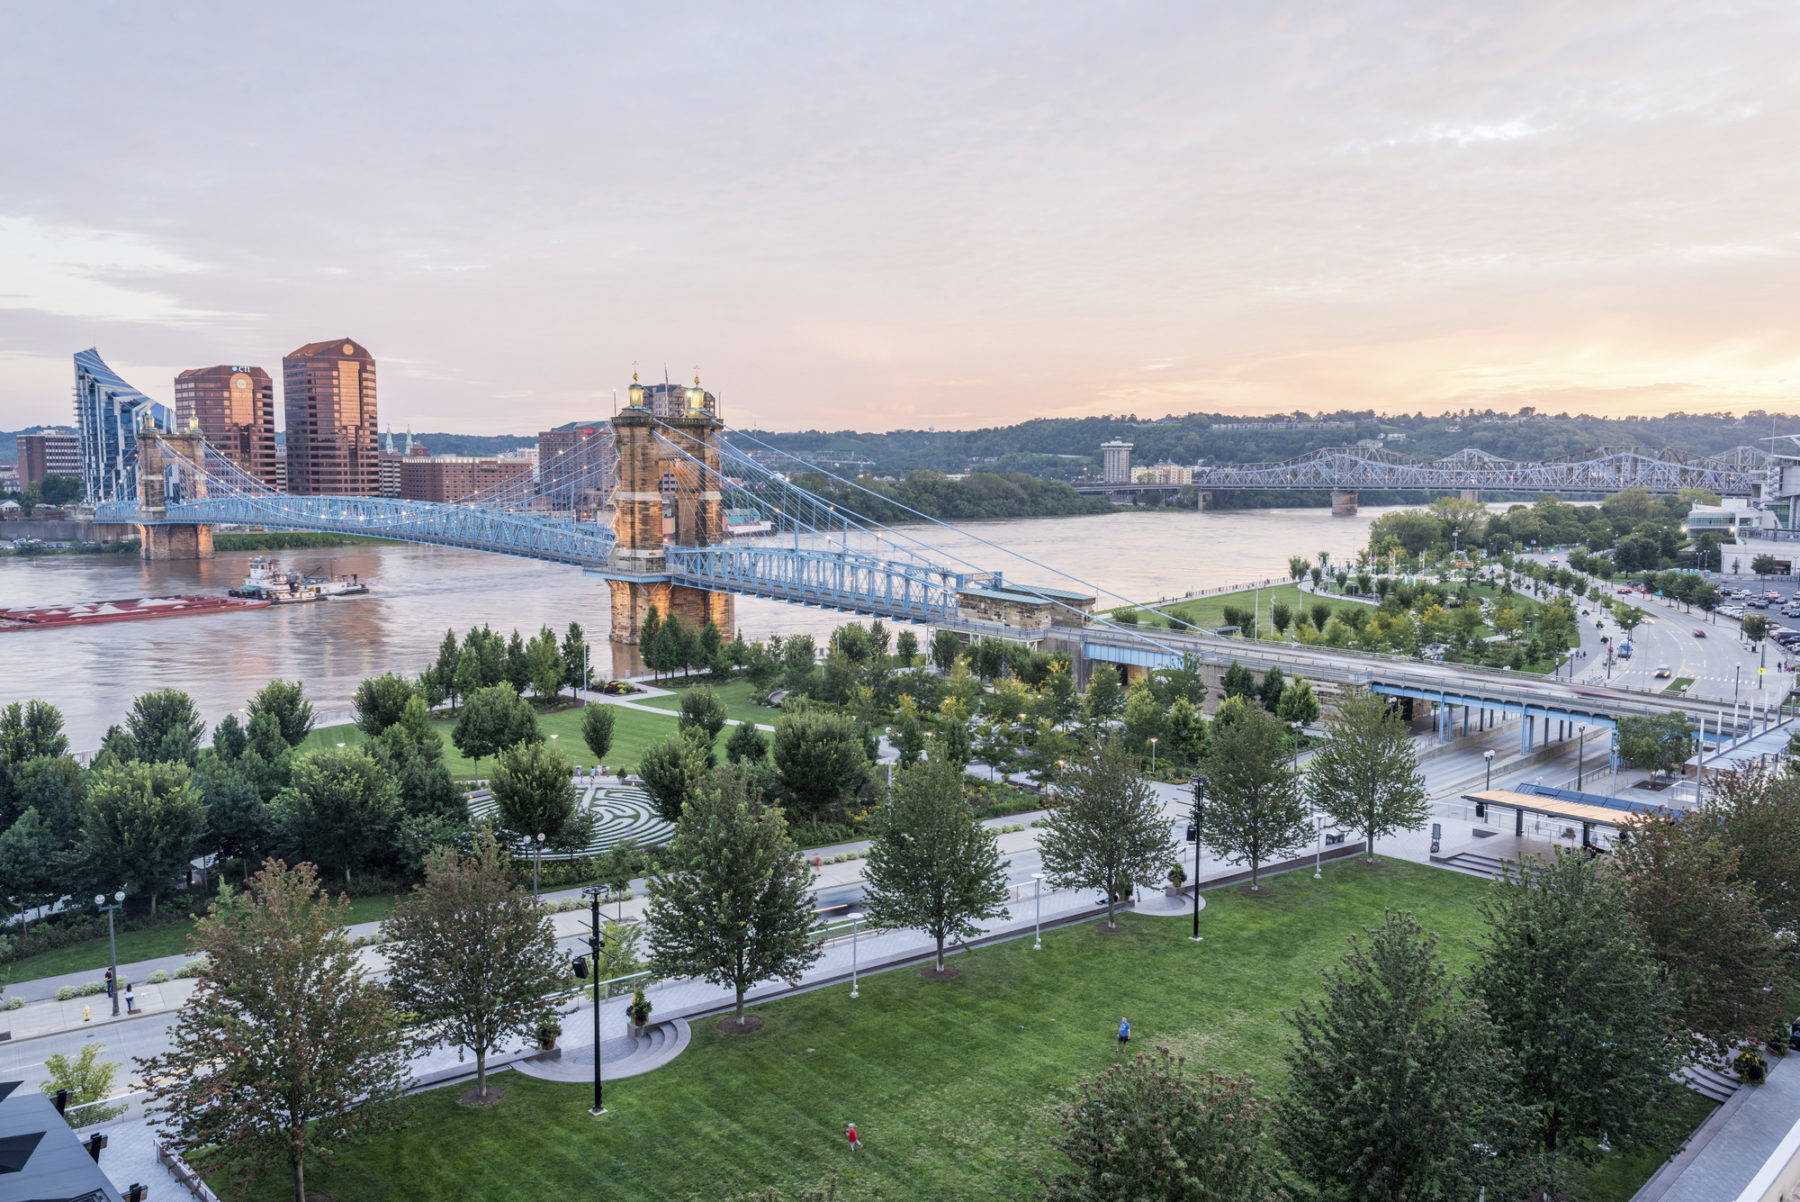 Photo: Bridge spans across Ohio River. A lush park sits in the foreground.